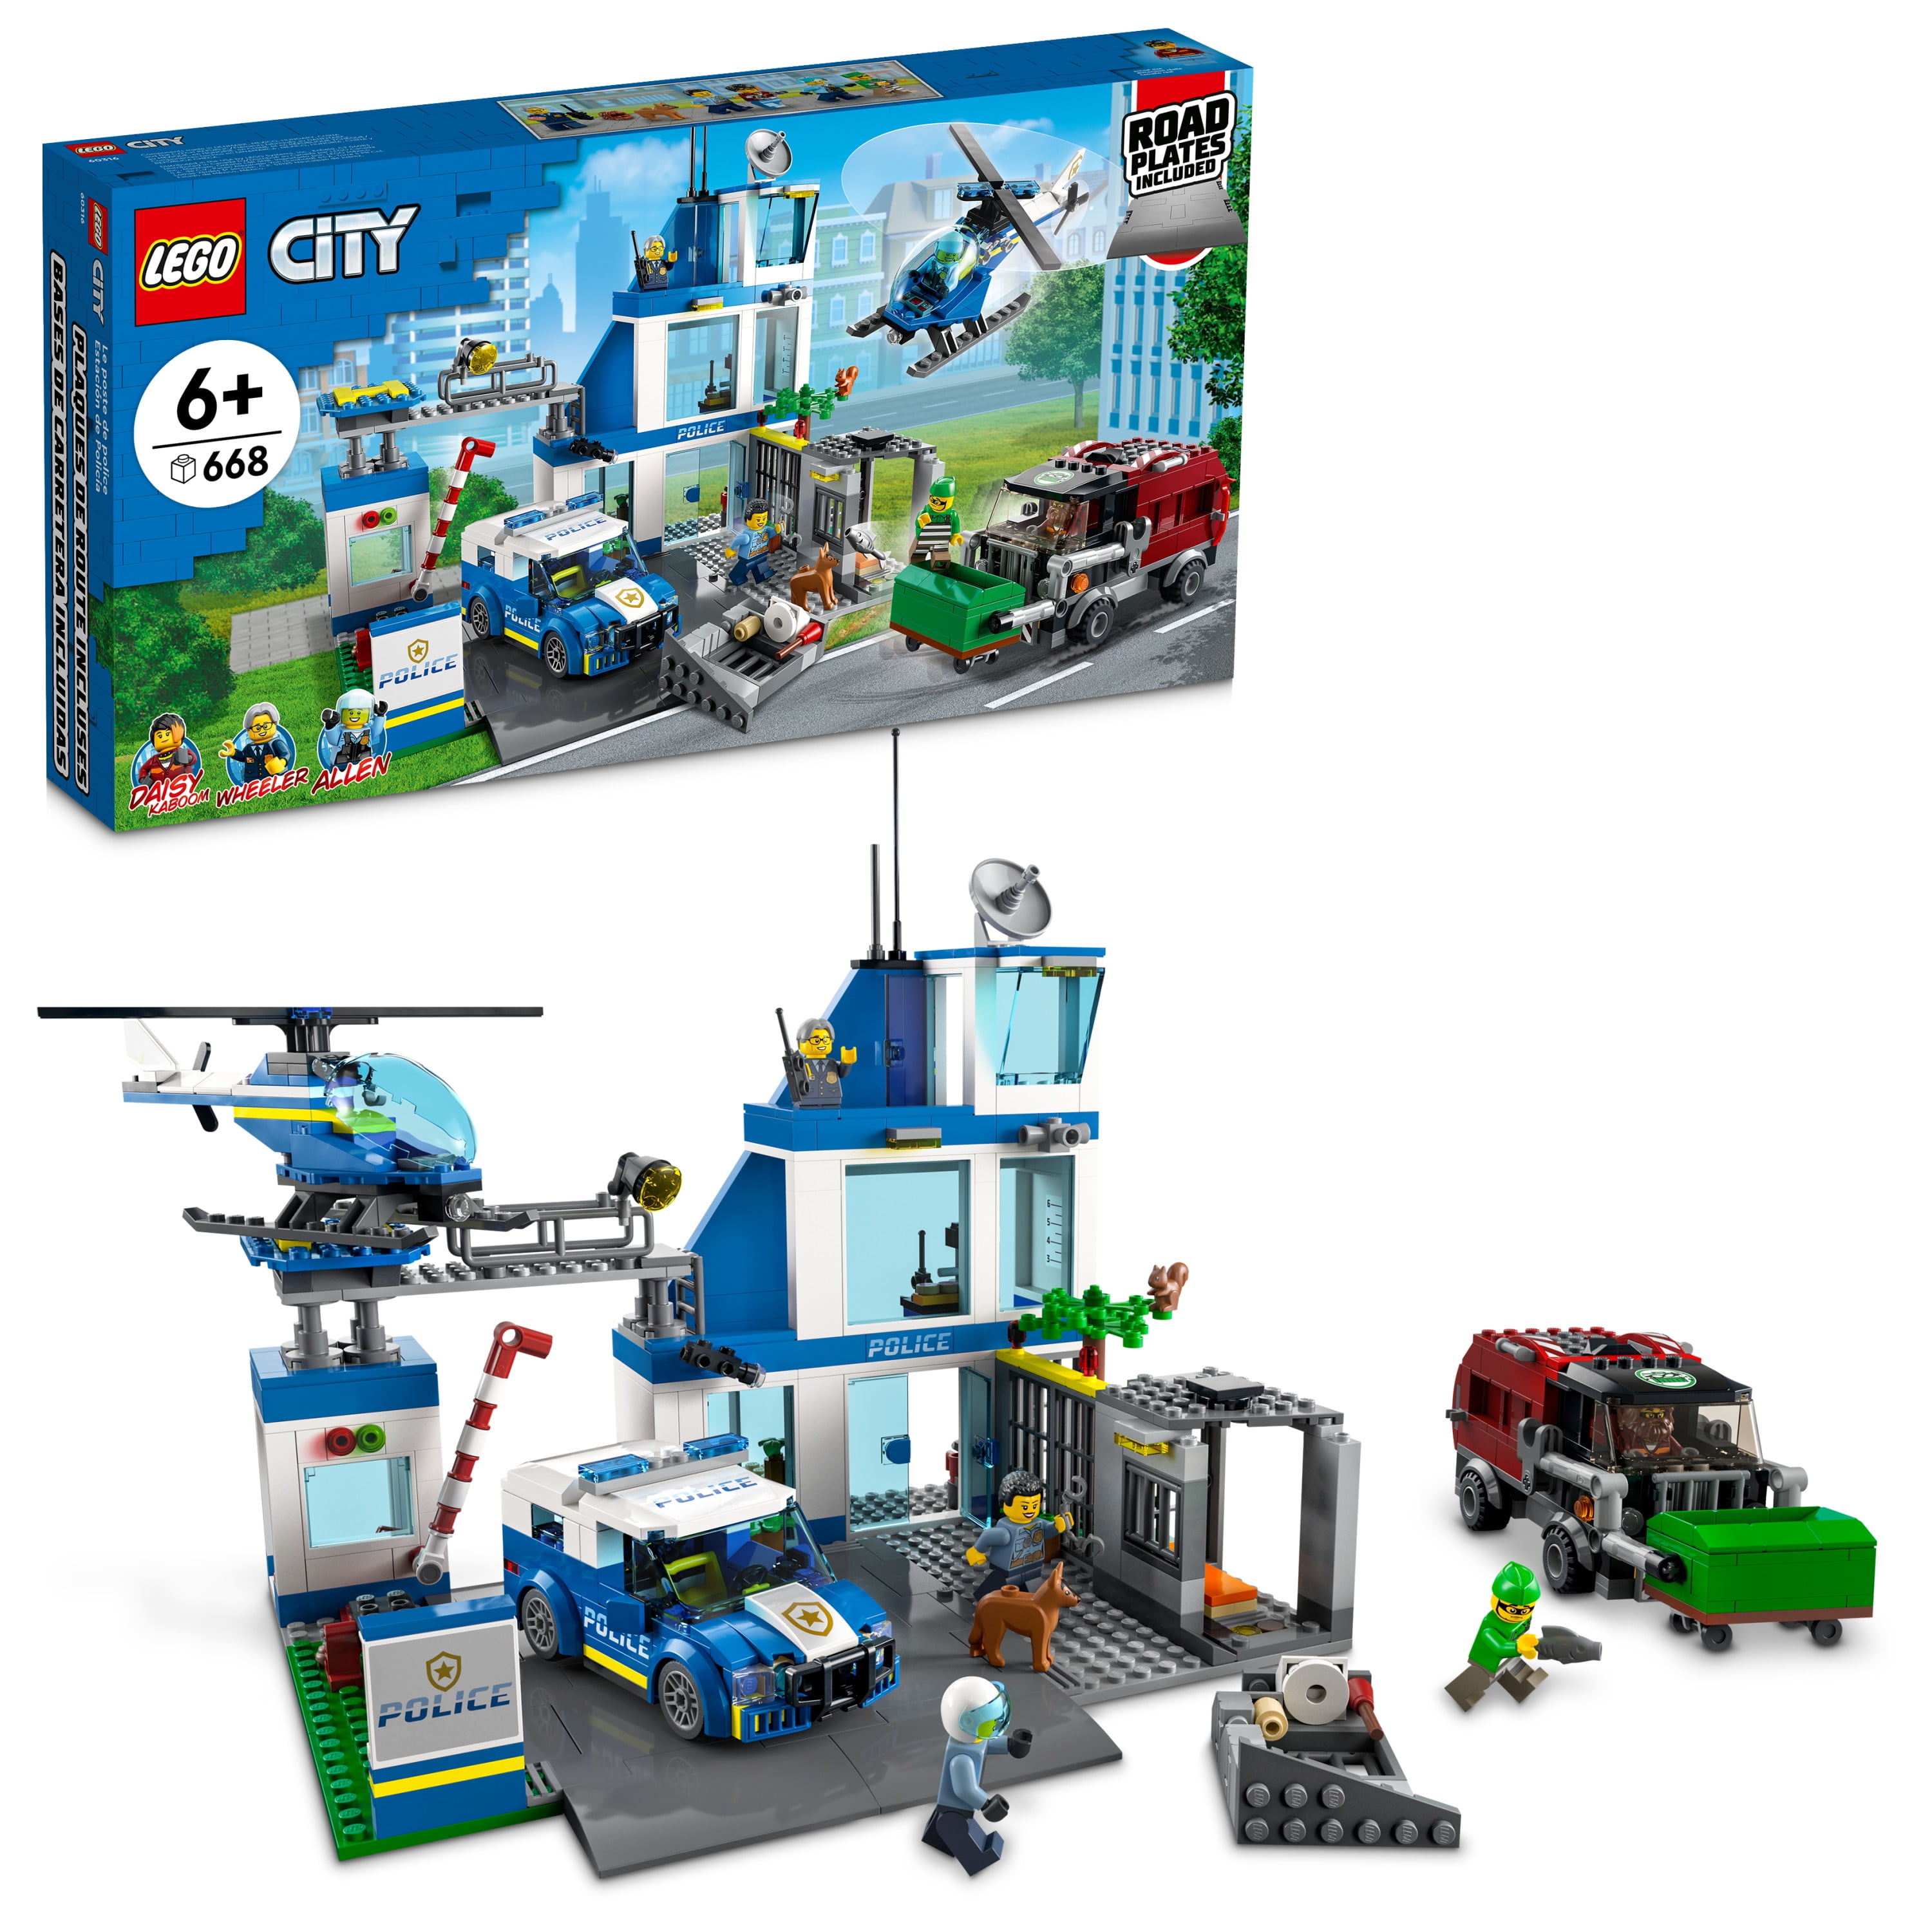 LEGO City Police Station with Van, Garbage Truck & Helicopter Toy 60316, Gifts for 6 Plus Year Old Kids, Boys & Girls with 5 Minifigures and Toy - Walmart.com